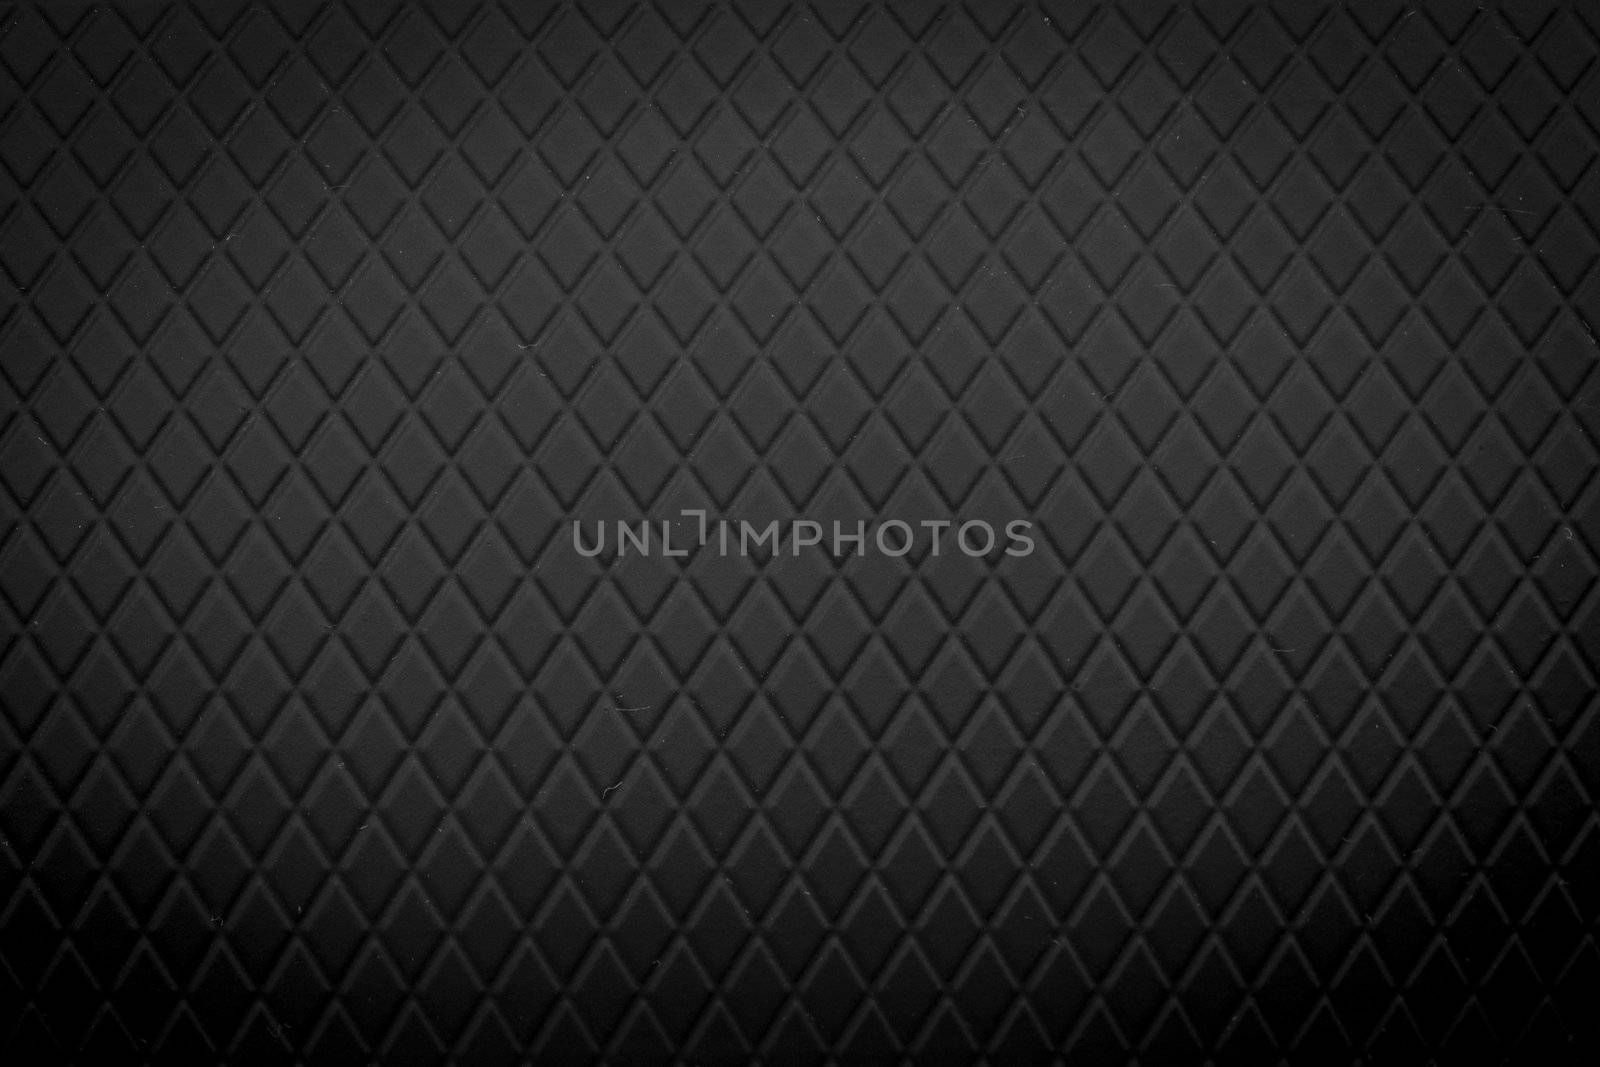 A close-up image of a texture backgroud. Check out other textures in my portfolio.